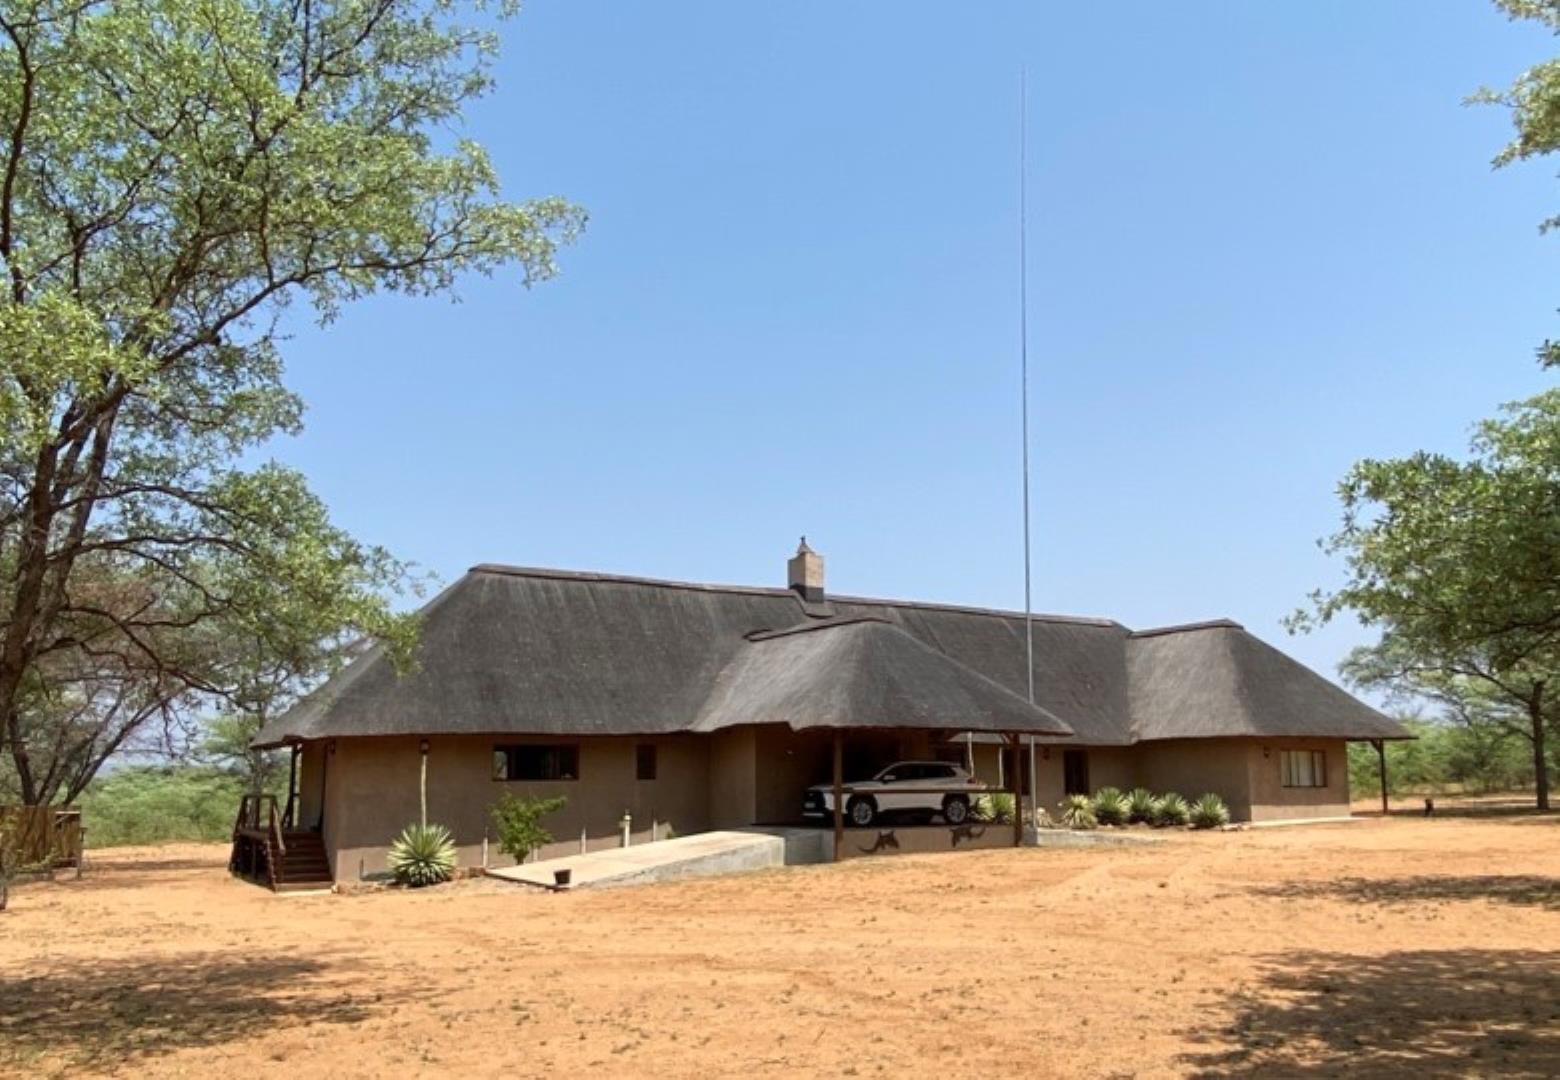 4 Bedroom Game Farm or Lodge for Sale - Limpopo